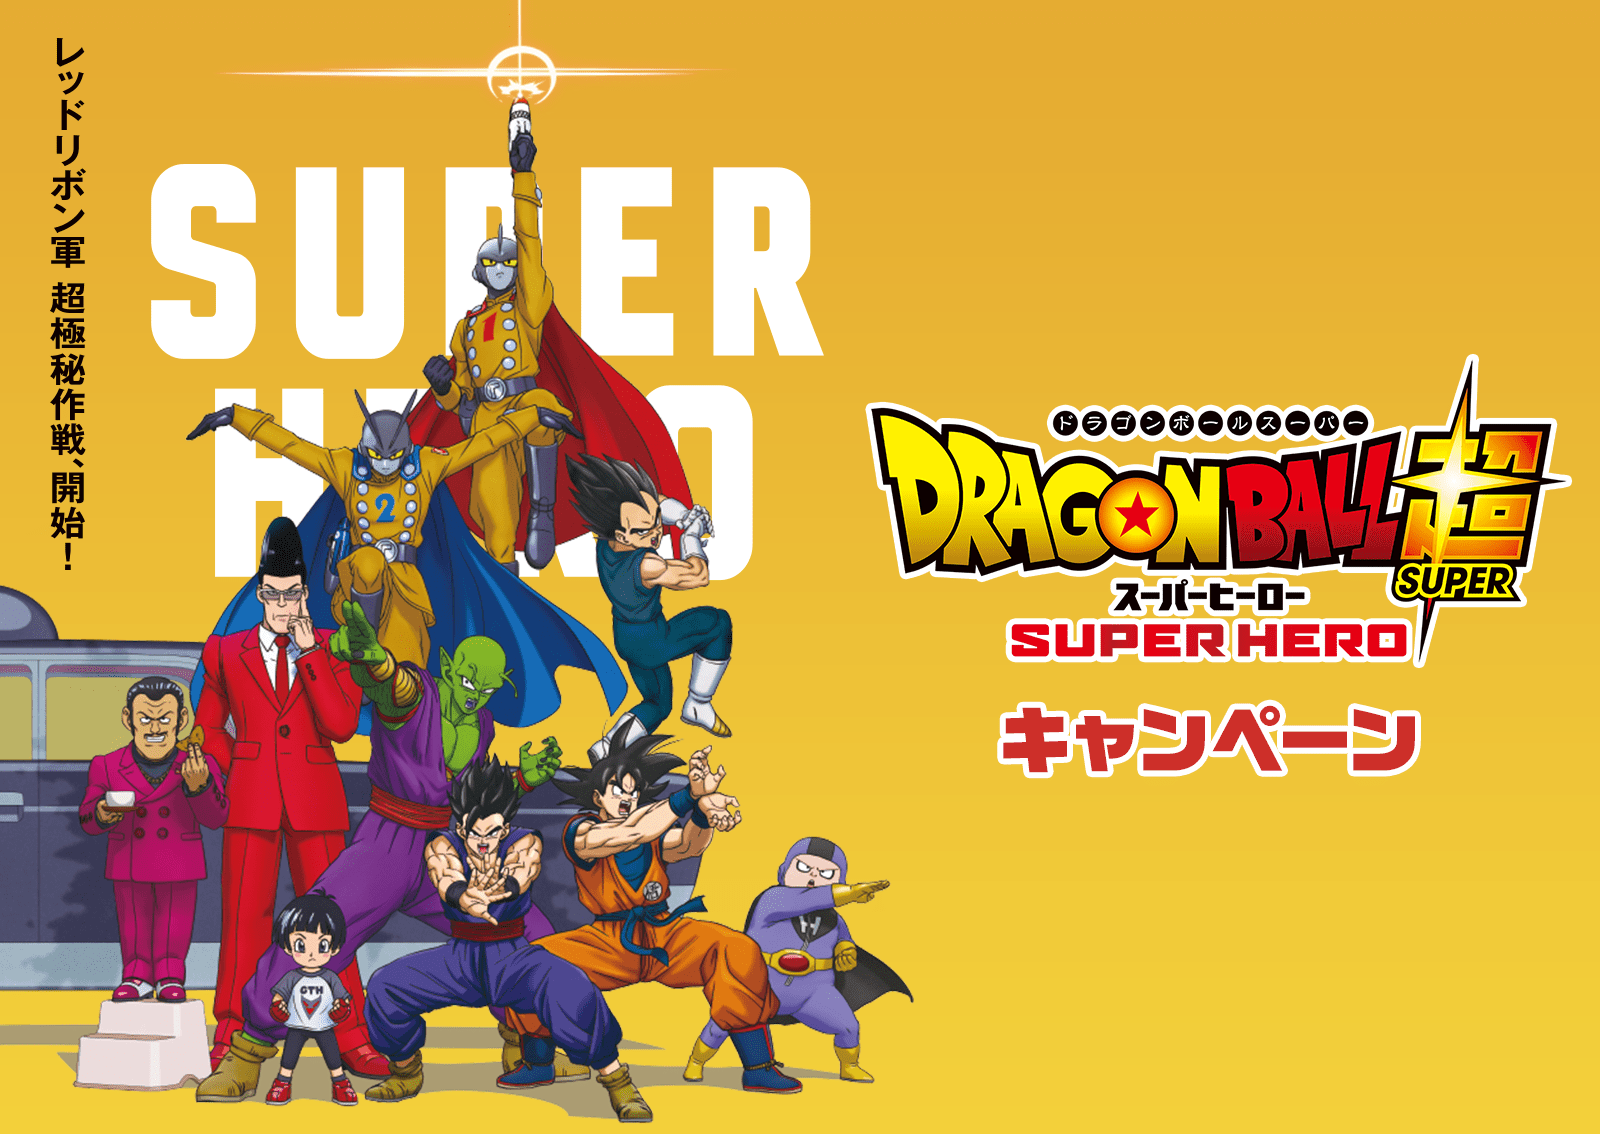 Dragon Ball Super: Super Hero Snacks and Goods Offered